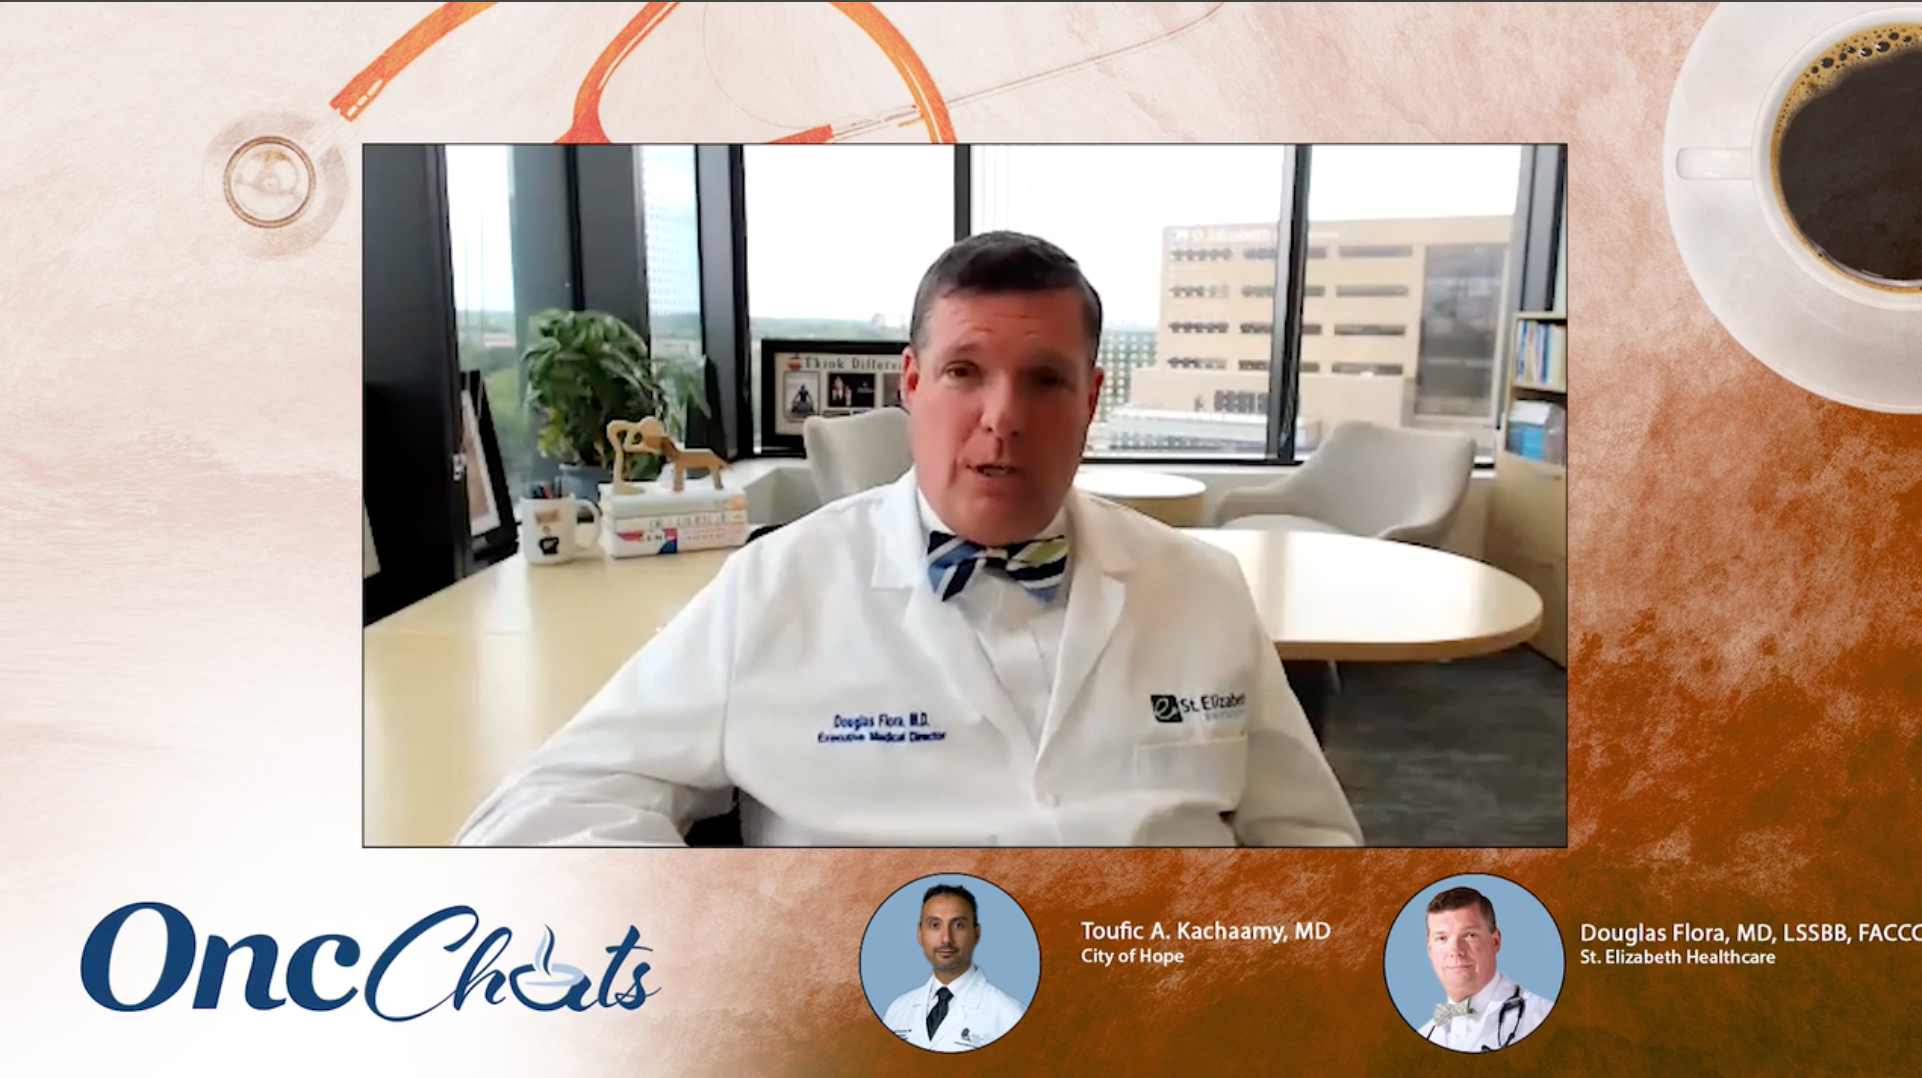 In this fifth episode of OncChats: Assessing the Promise of AI in Oncology, Toufic A. Kachaamy, MD, and Douglas Flora, MD, LSSBB, FACCC, discuss the need for evidence to support the utilization of different artificial intelligence tools in healthcare.